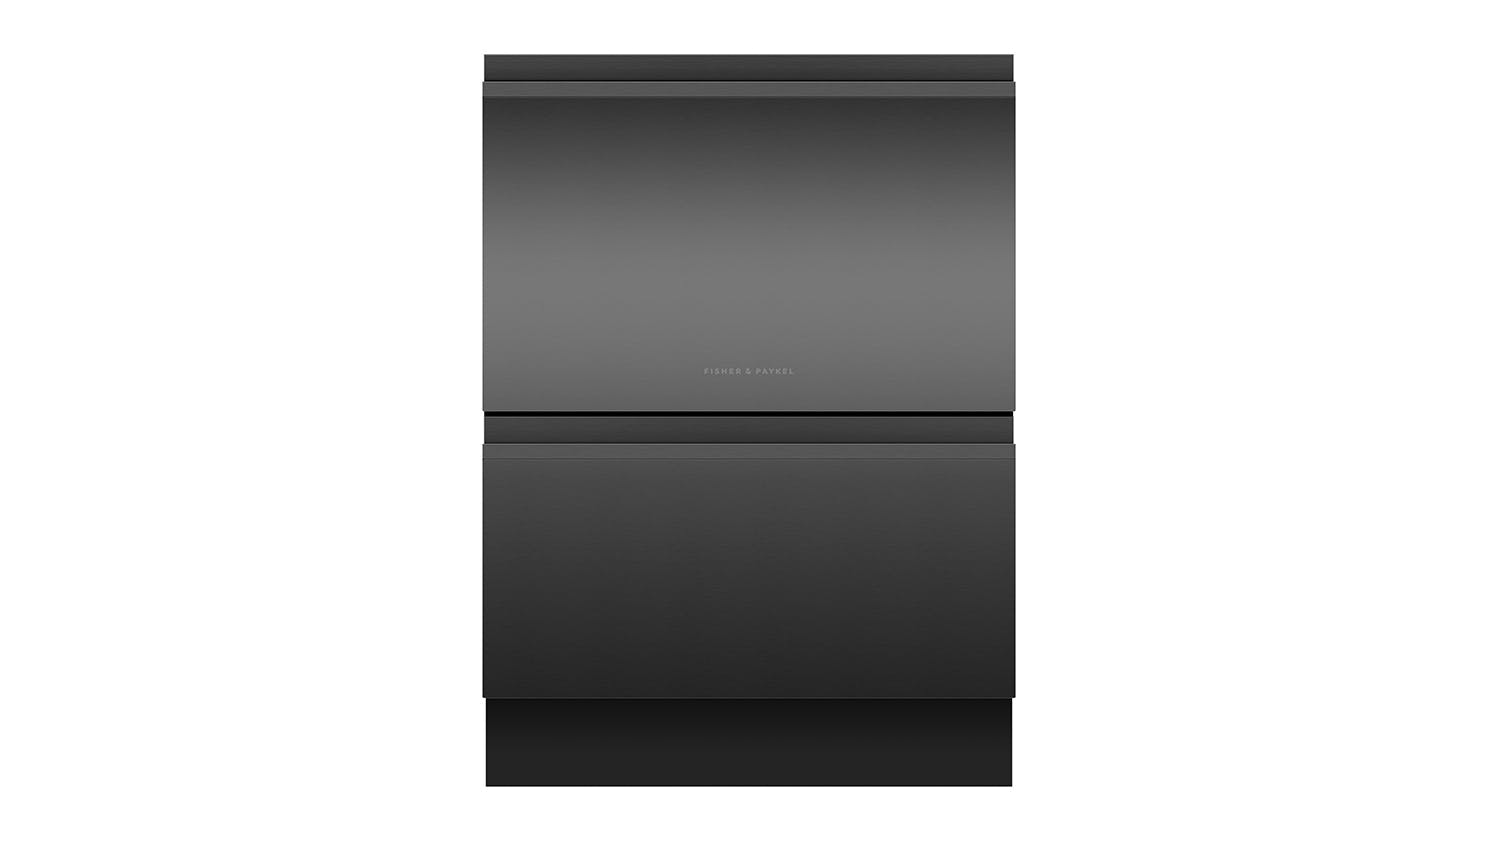 Fisher and Paykel Built-In Tall Double Drawer Dishwasher with 14